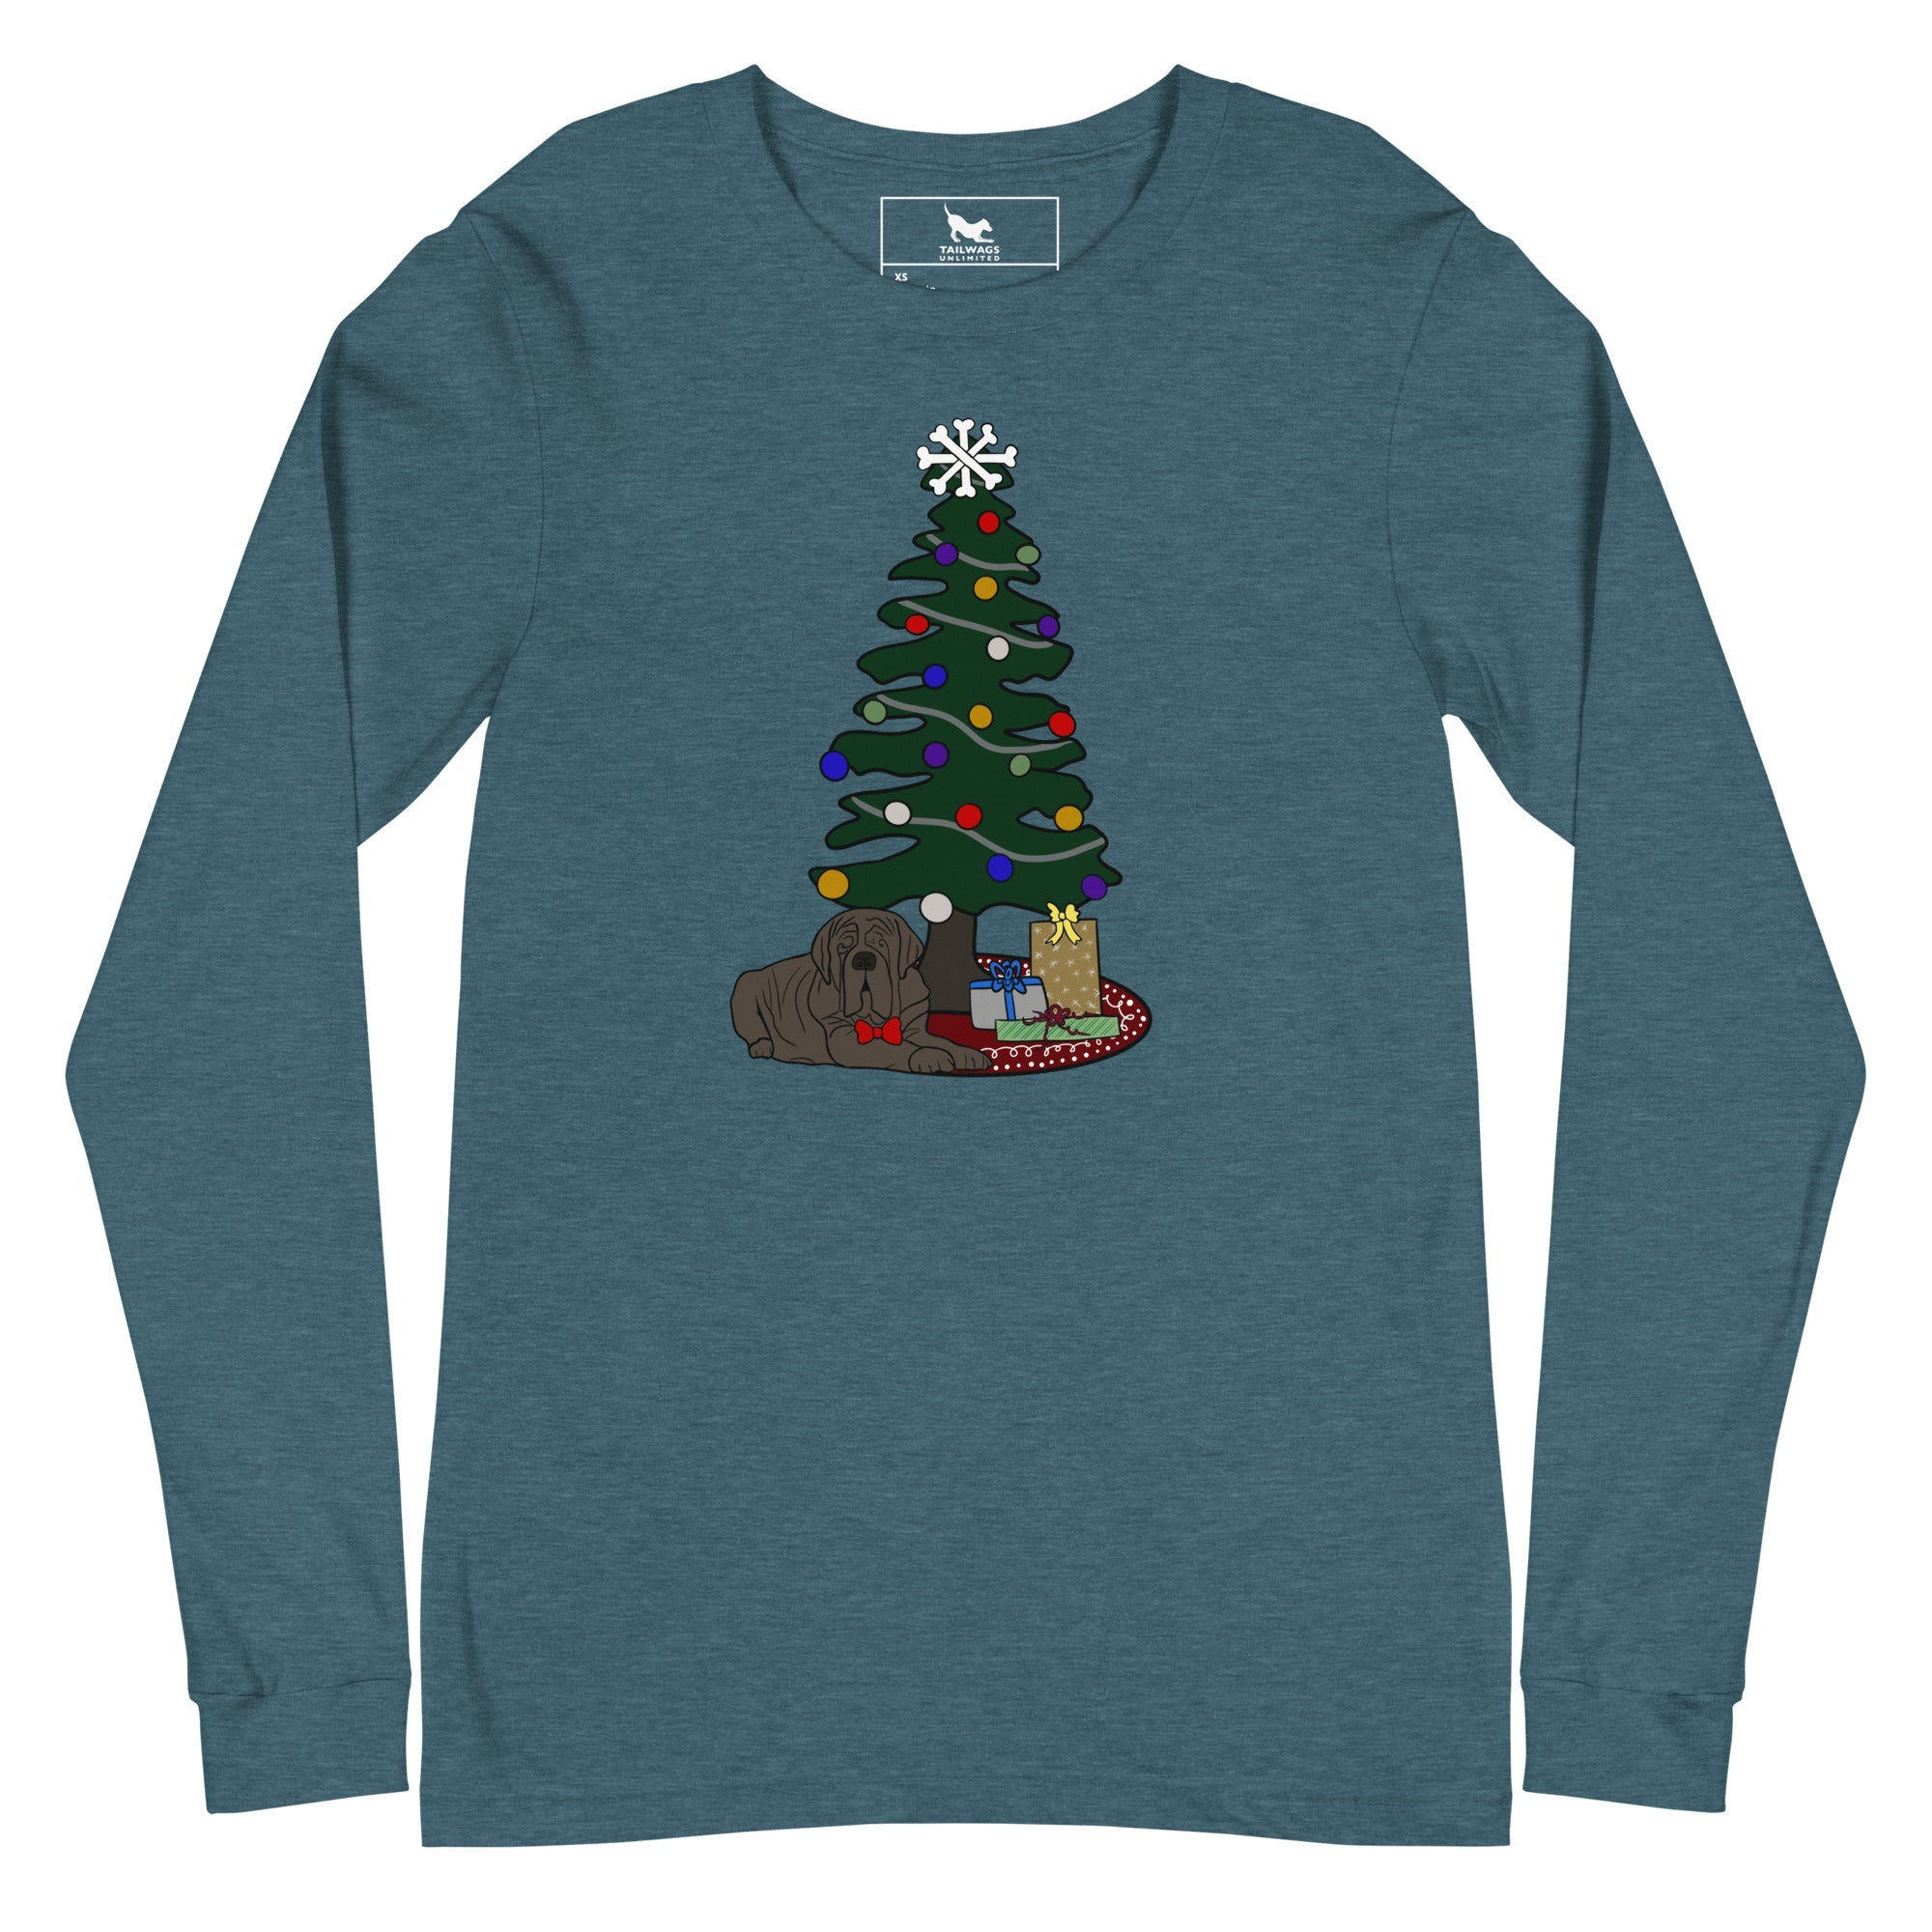 Chillin' Under the Christmas Tree Long Sleeve Tee - TAILWAGS UNLIMITED